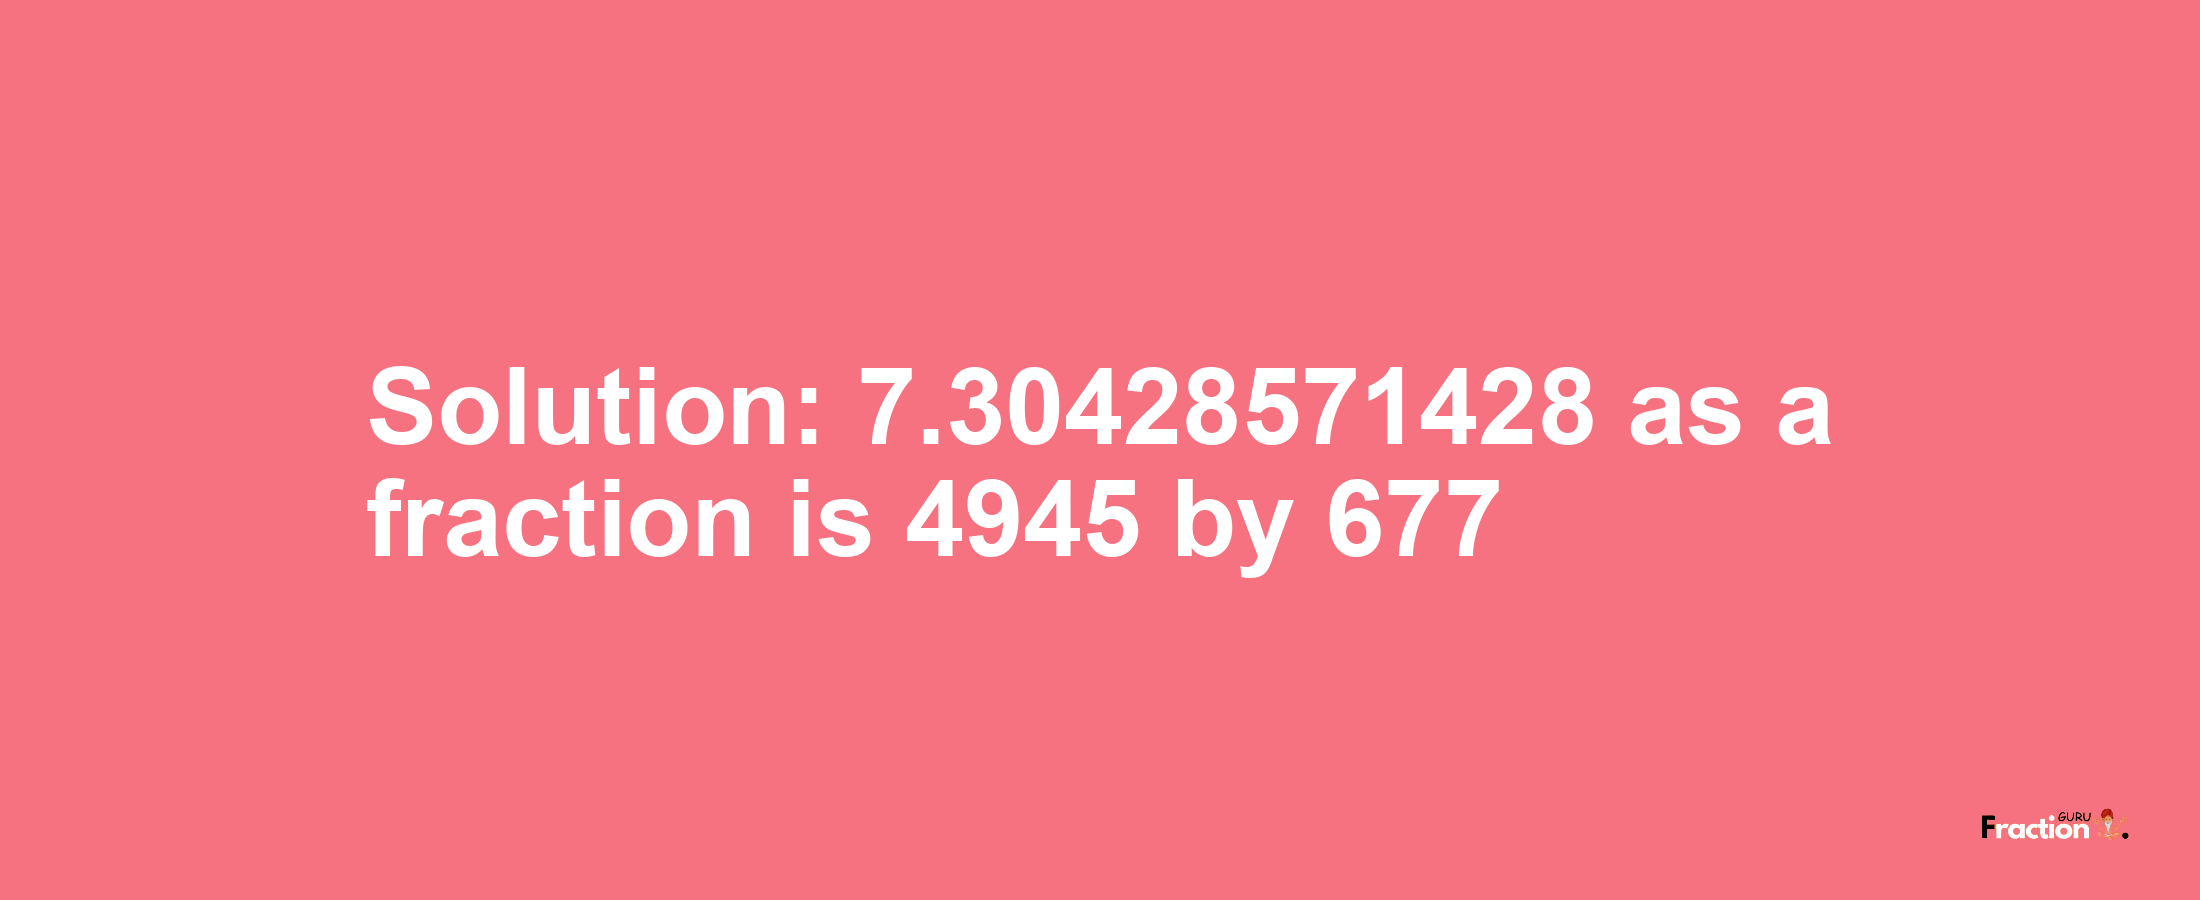 Solution:7.30428571428 as a fraction is 4945/677